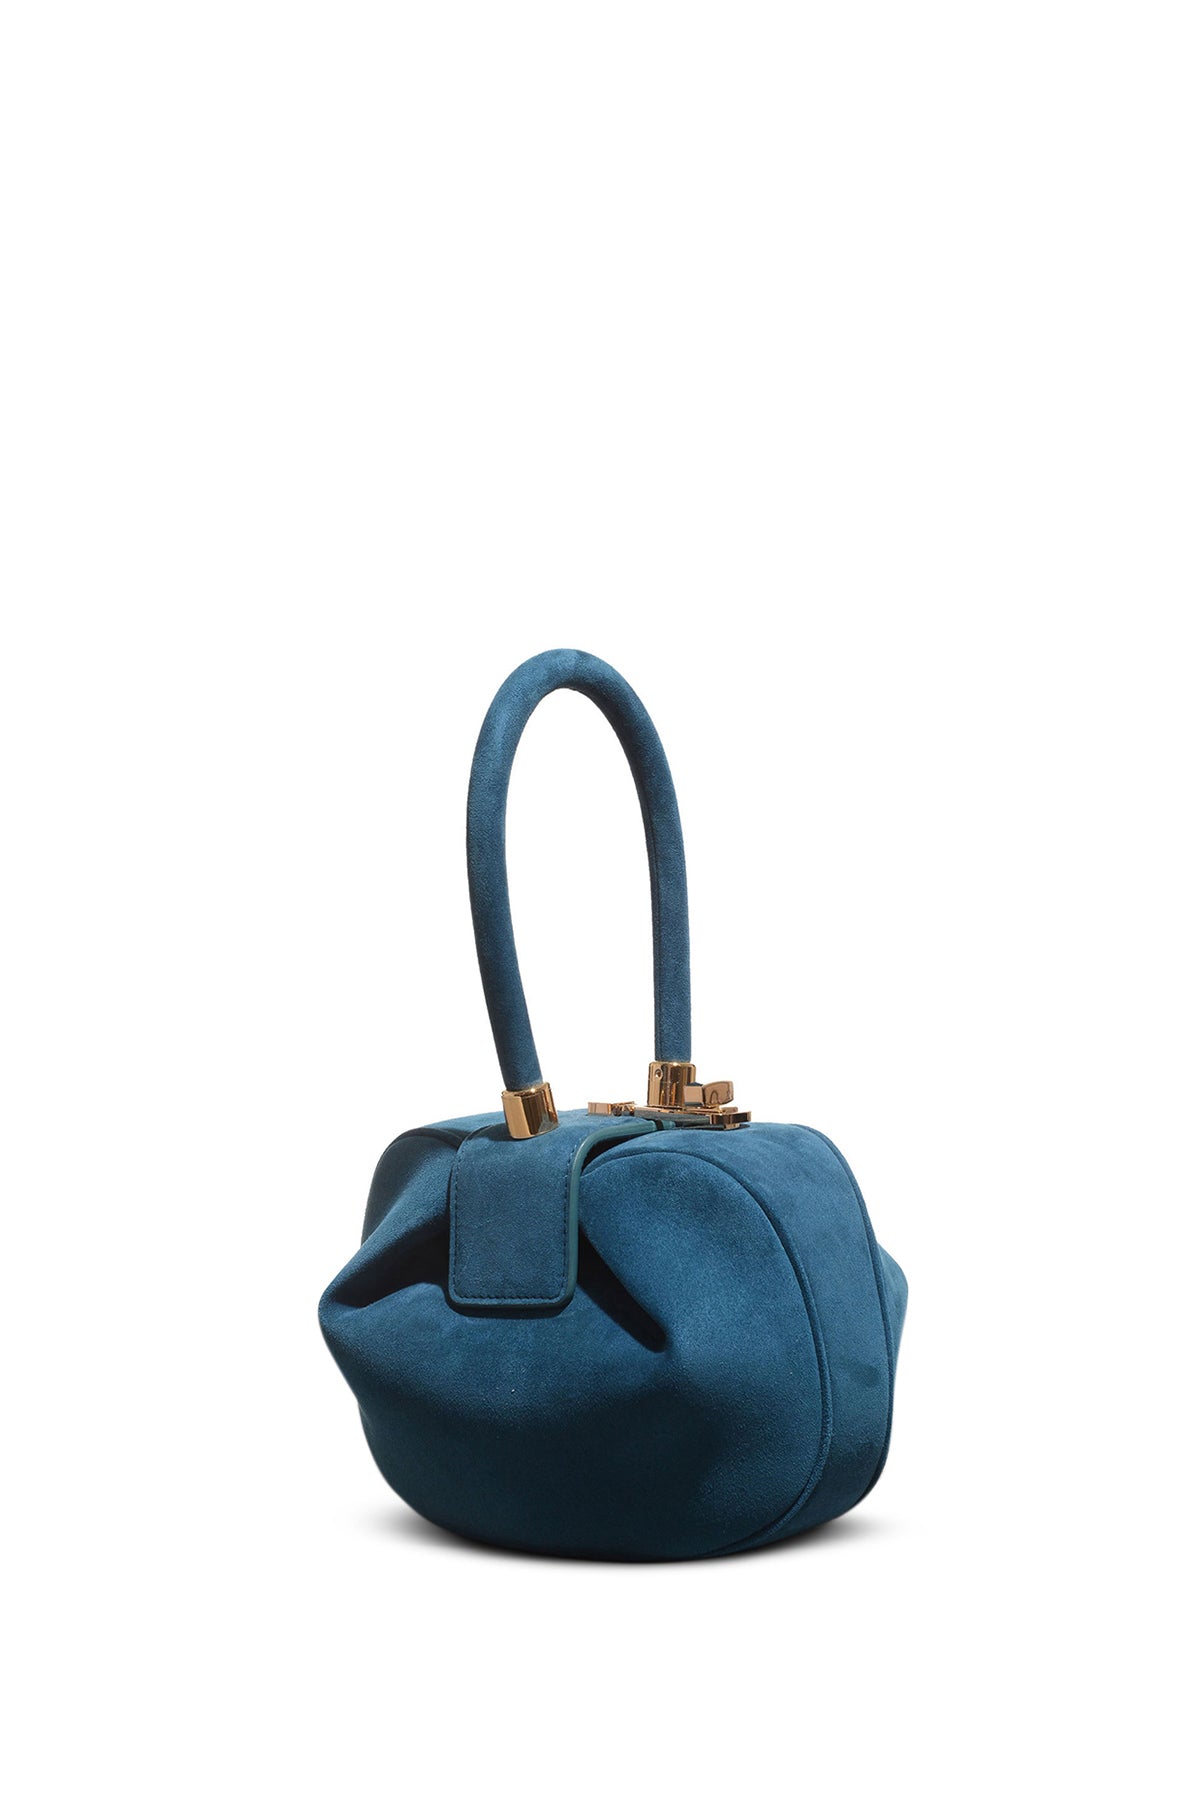 Demi Bag in Teal Suede